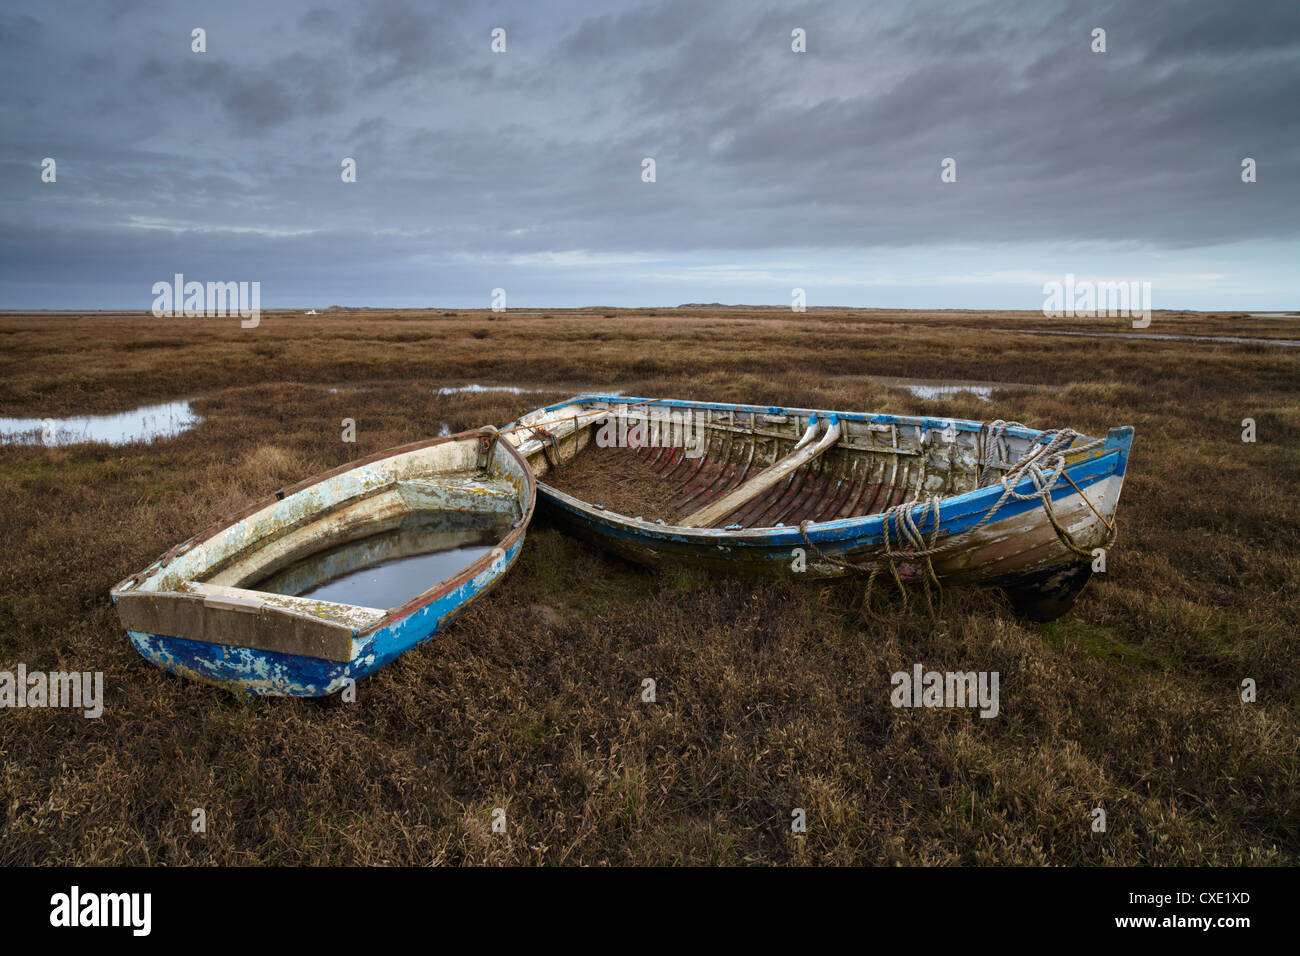 Two old boats on the saltmarshes at Burnham Deepdale, Norfolk, England Stock Photo